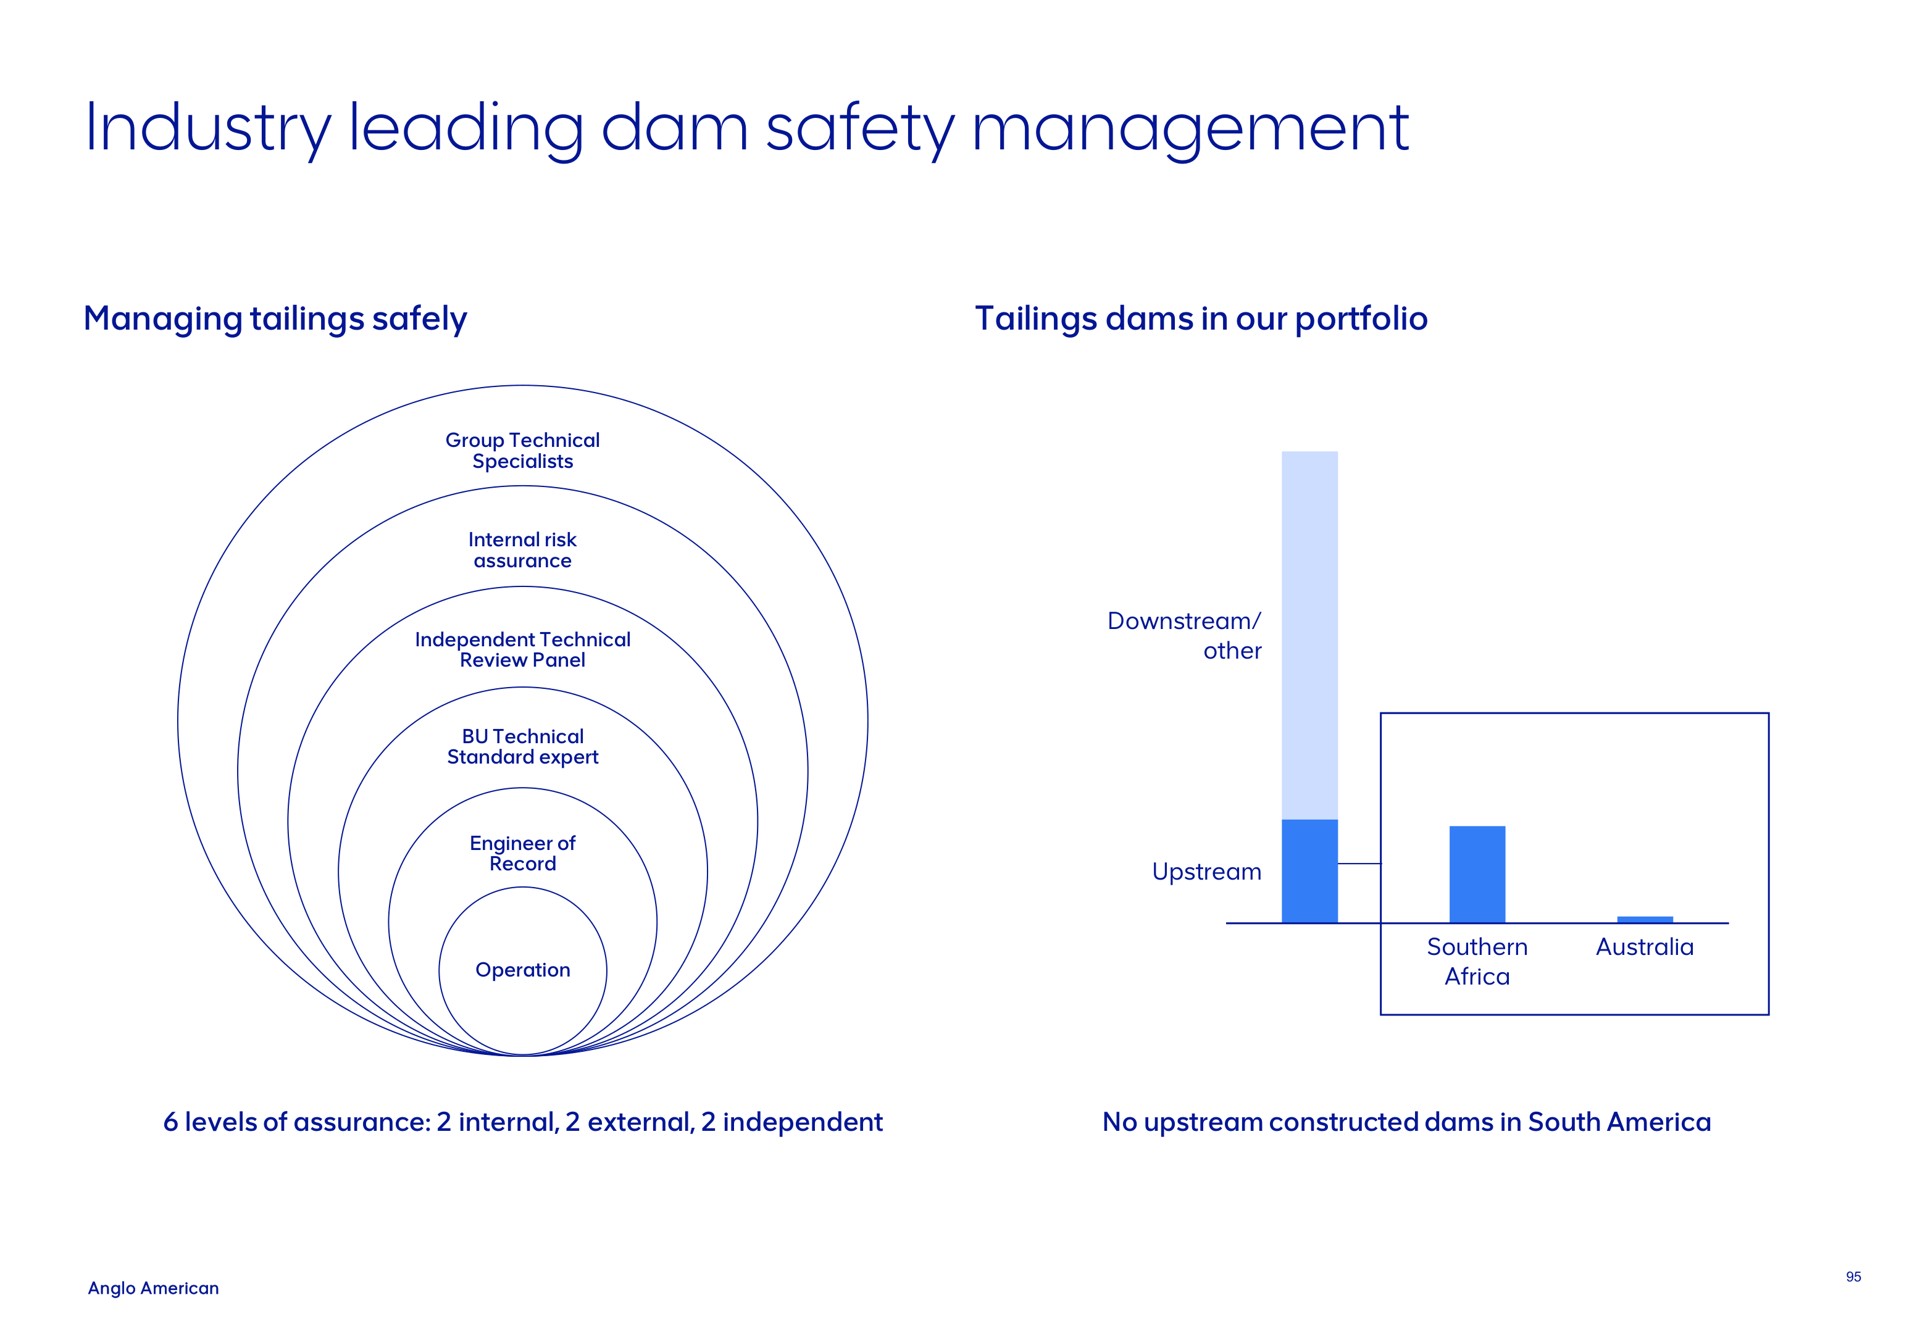 industry leading dam safety management | AngloAmerican